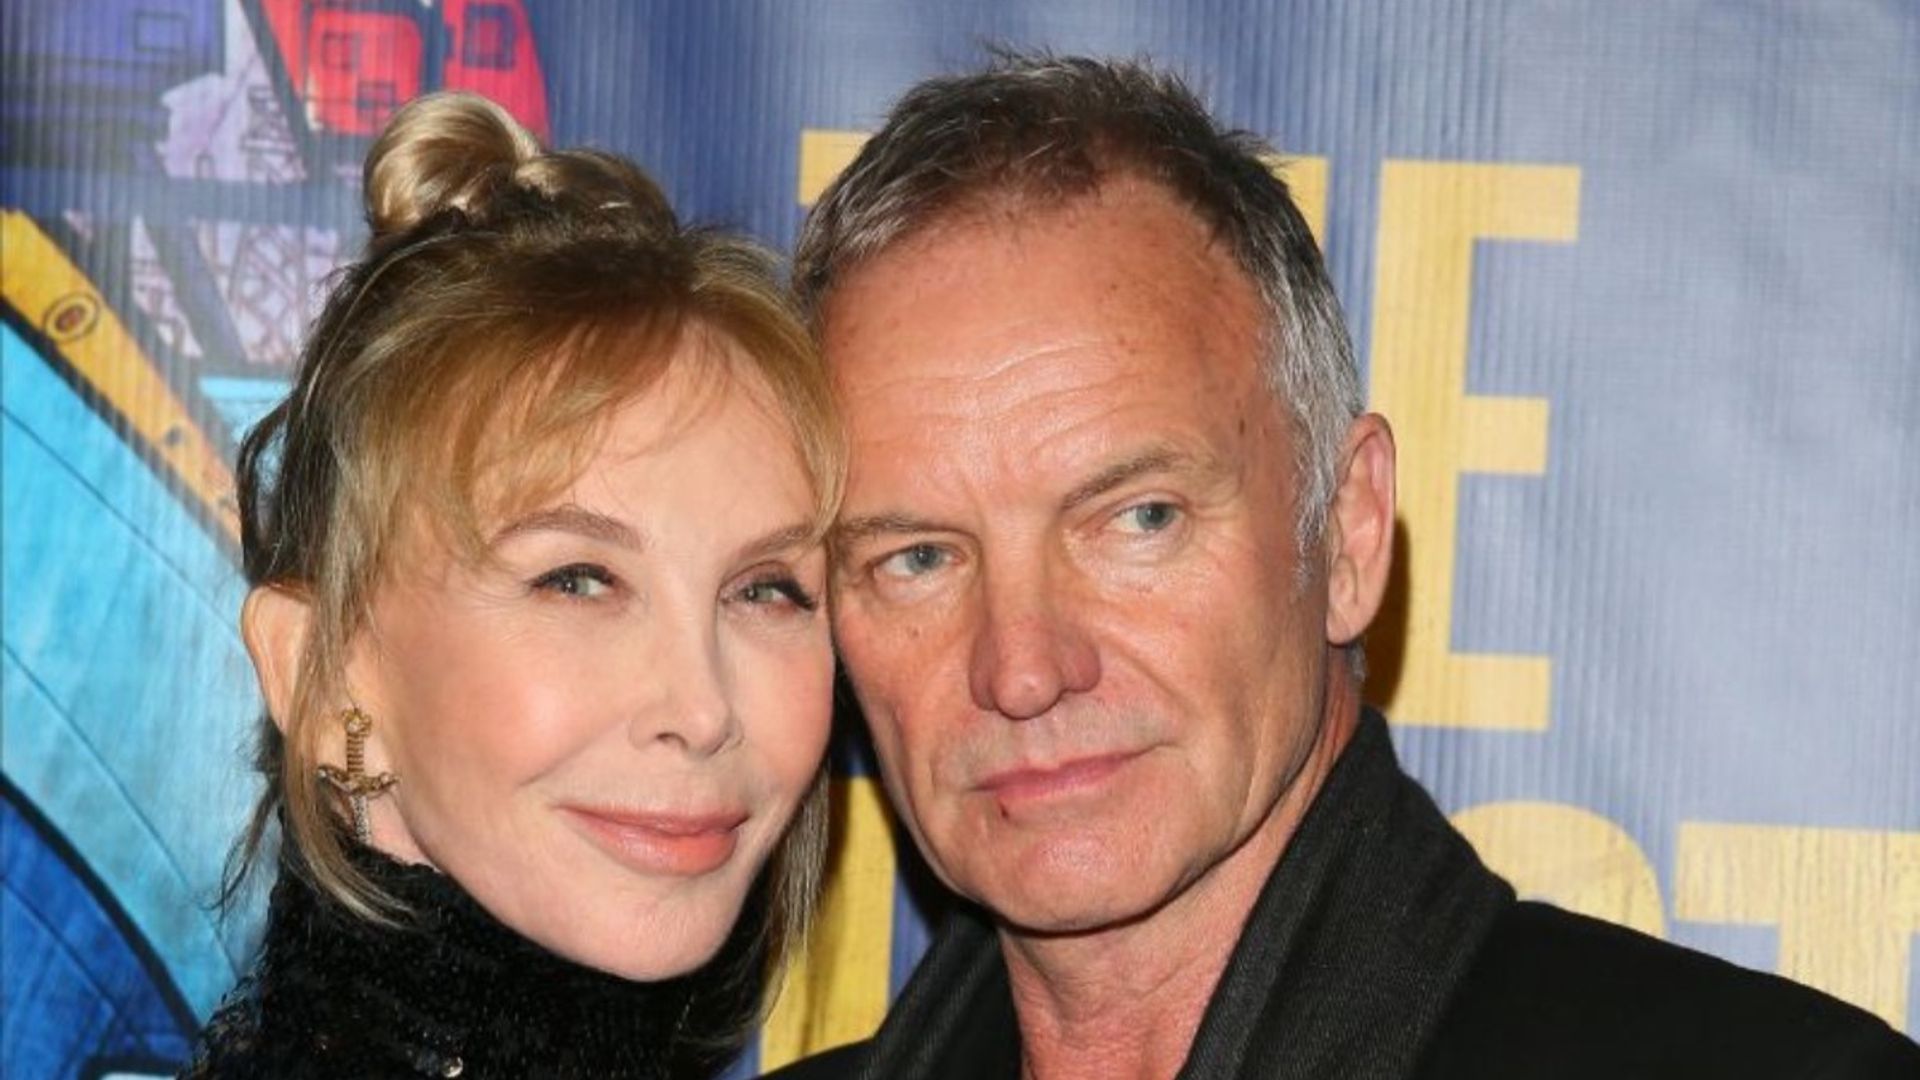 Sting and Trudie Styler delight fans with exciting announcement